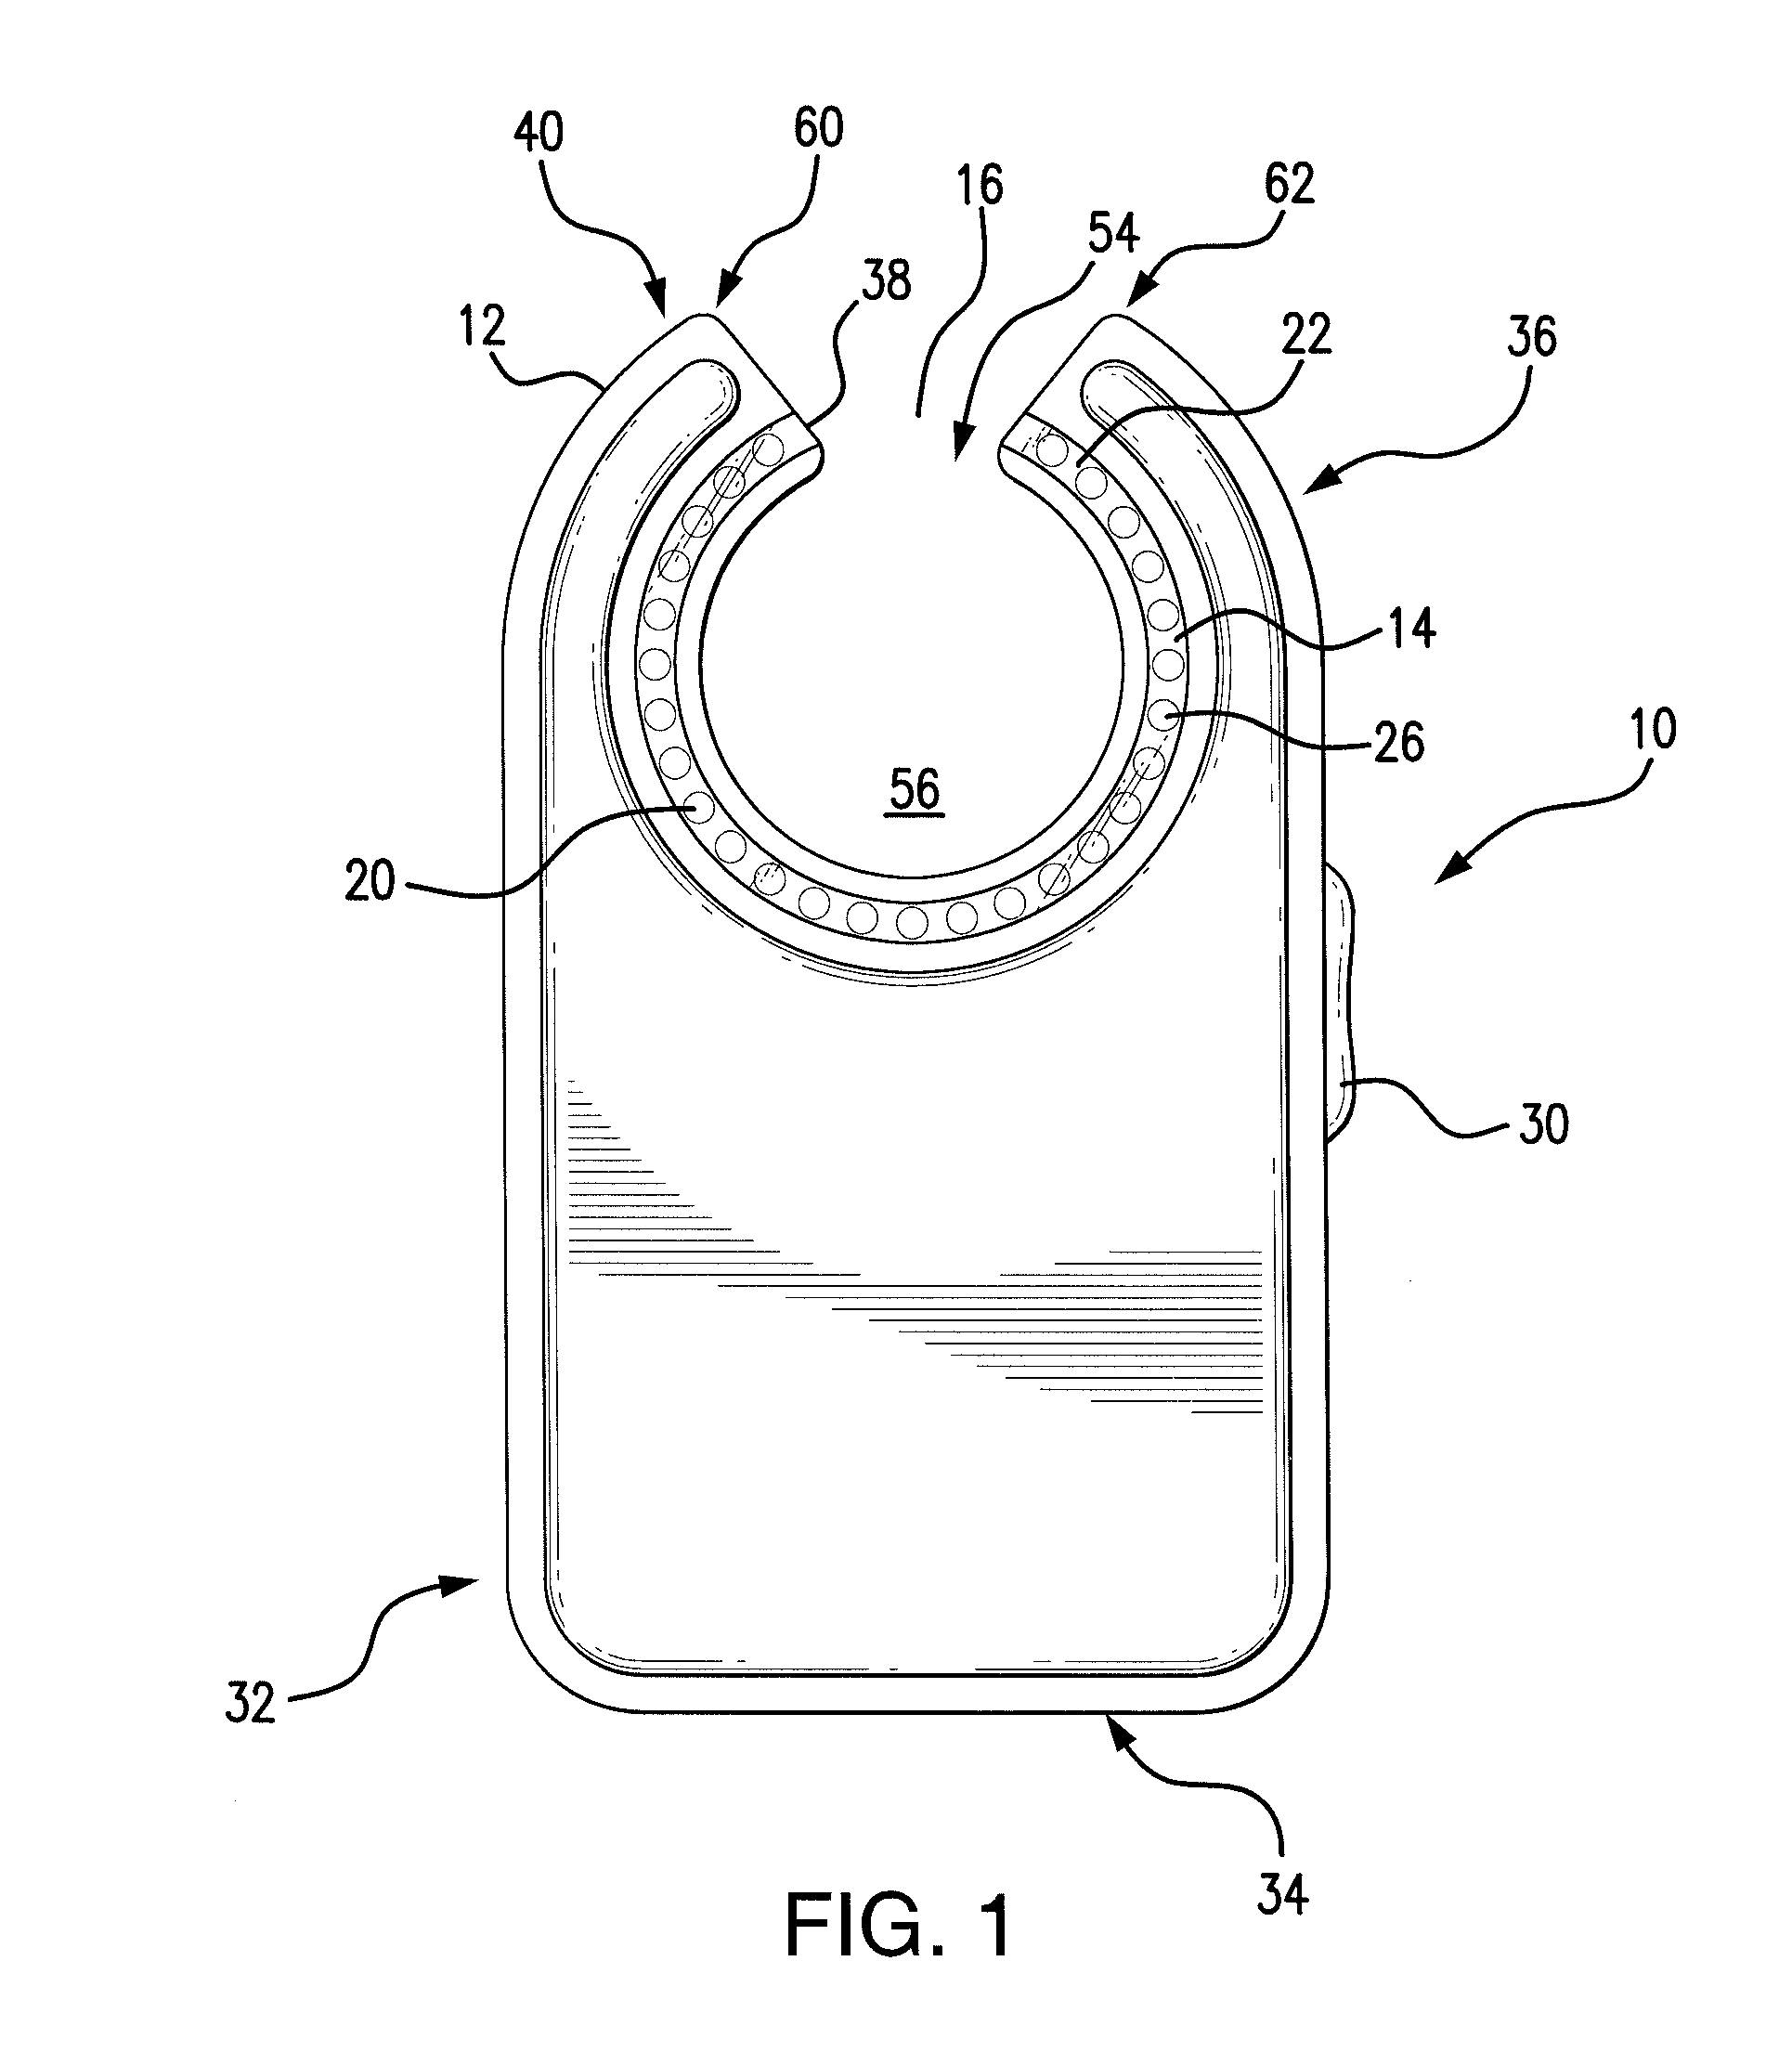 Vein transillumination device using orange and red light with a white exam light